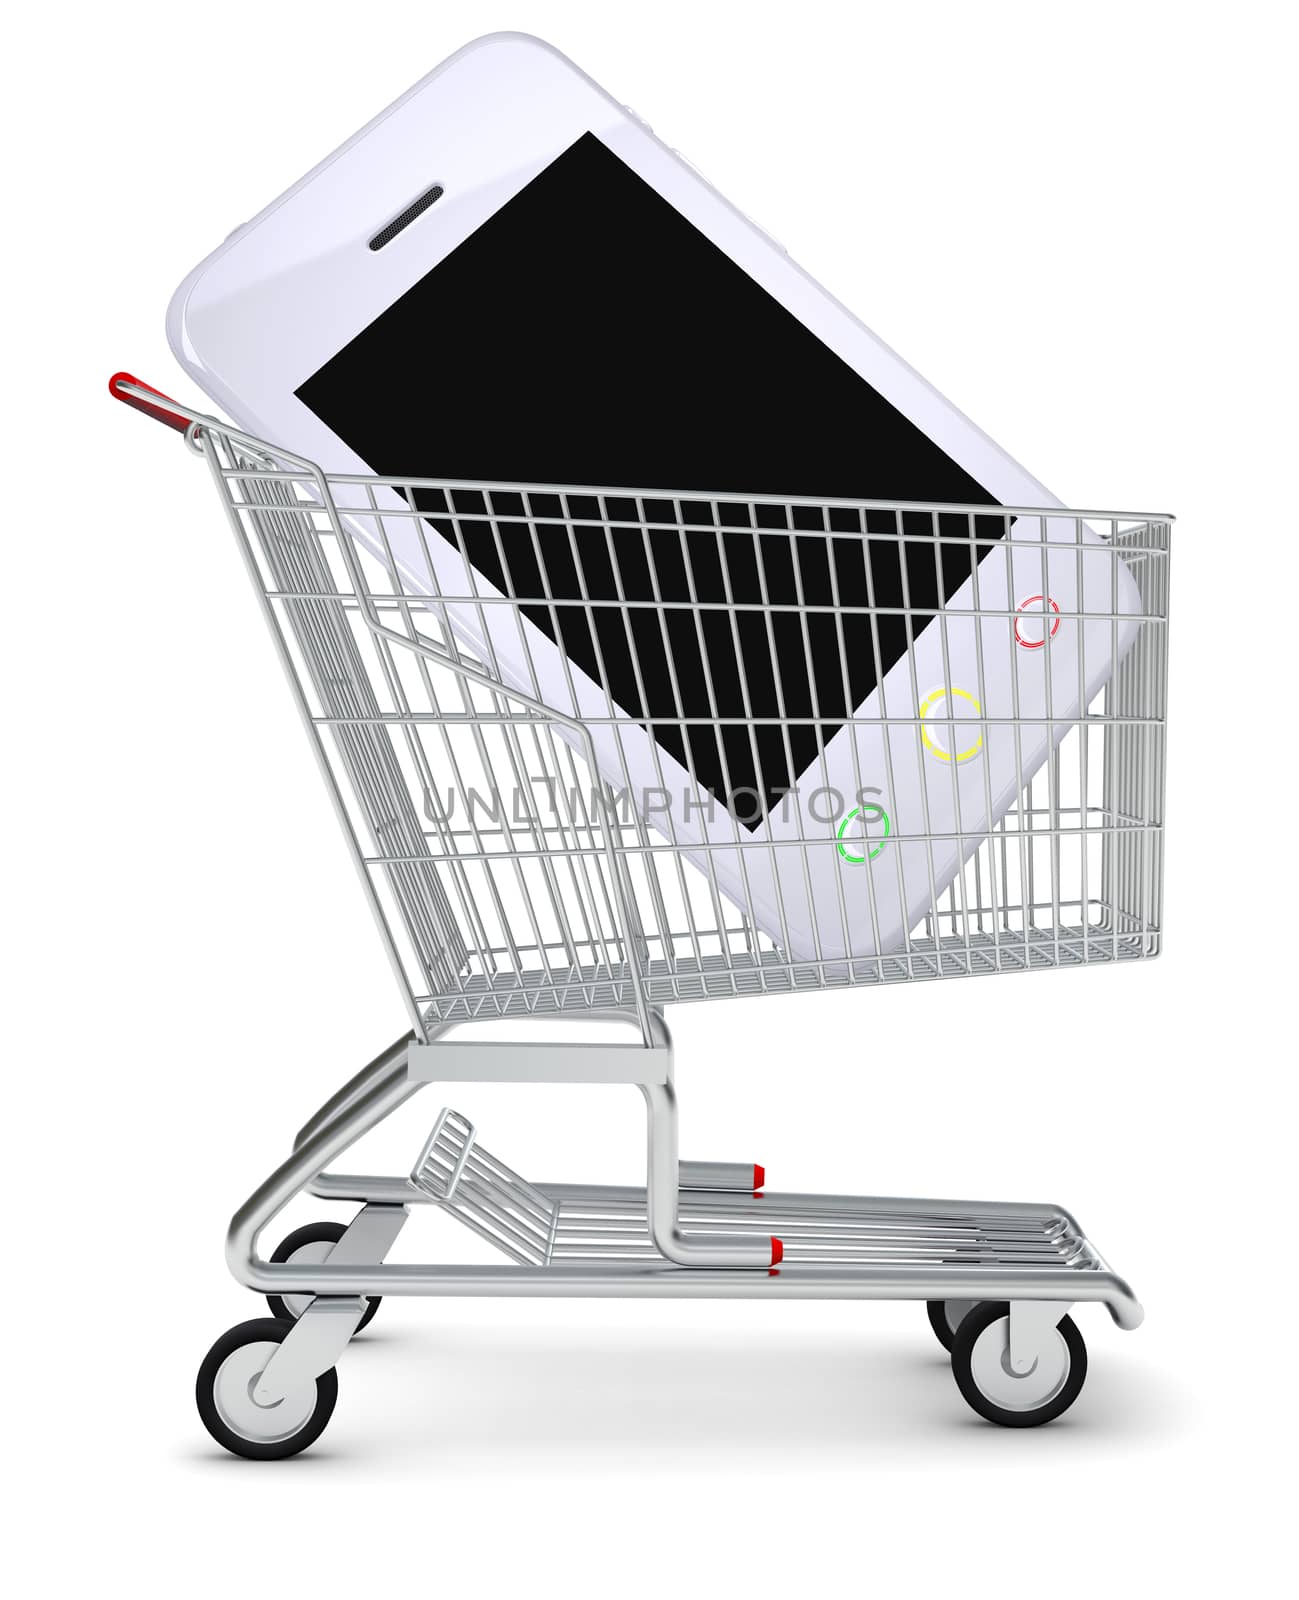 Smartphone in shopping cart by cherezoff